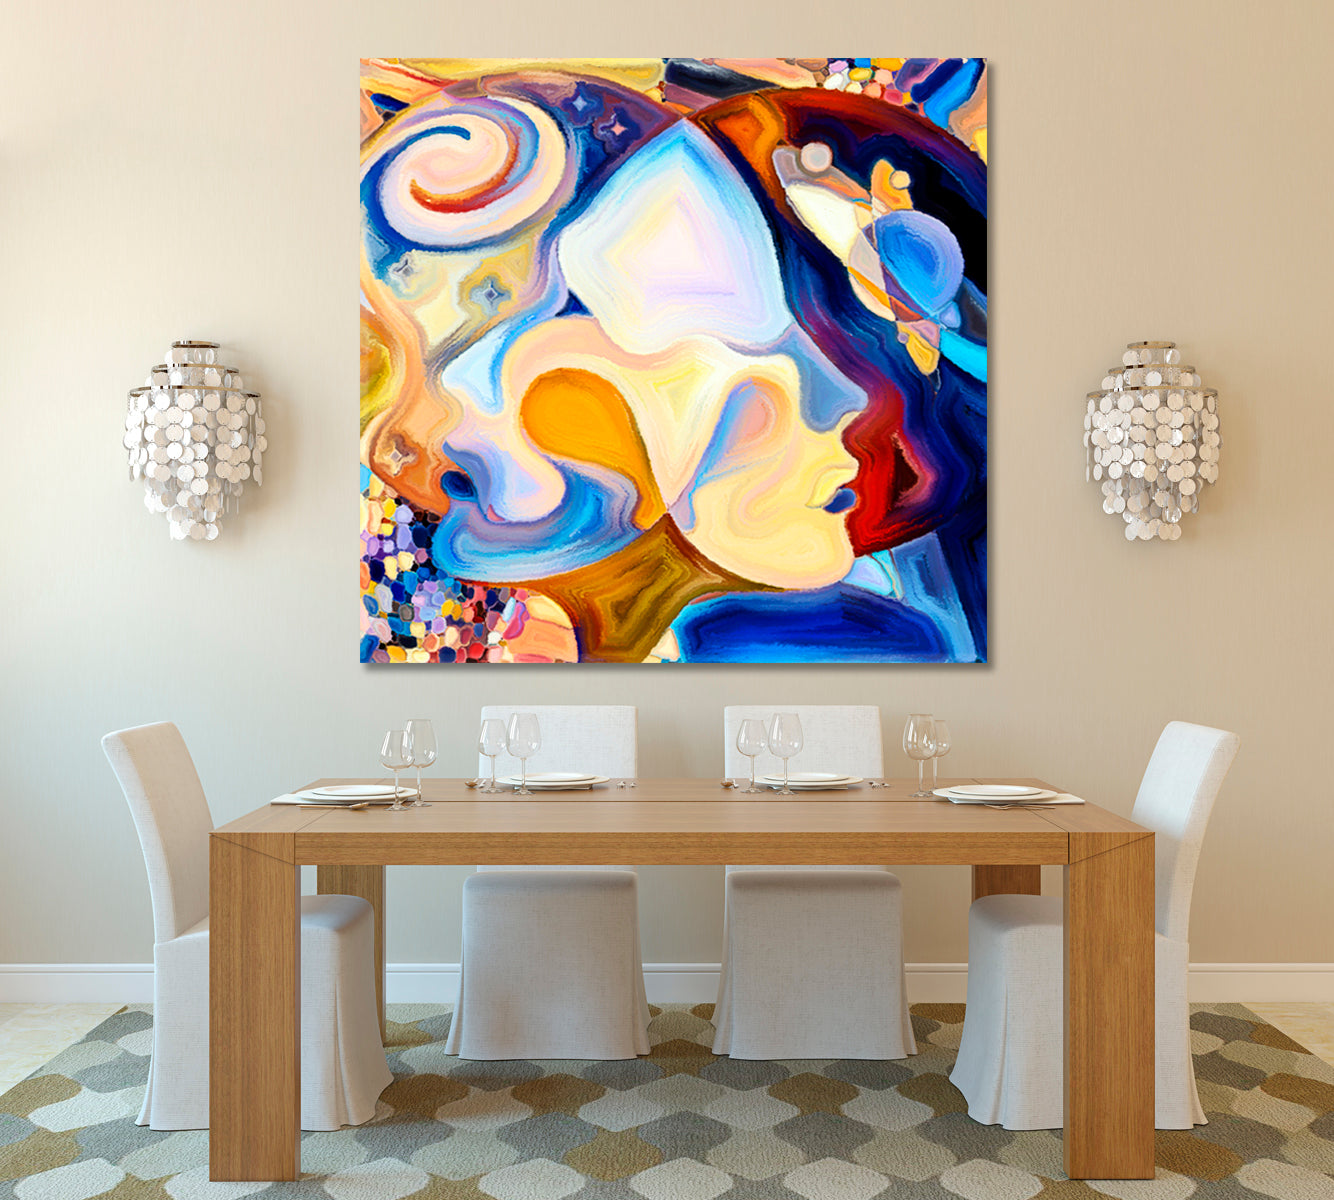 Large square painting in multi colours